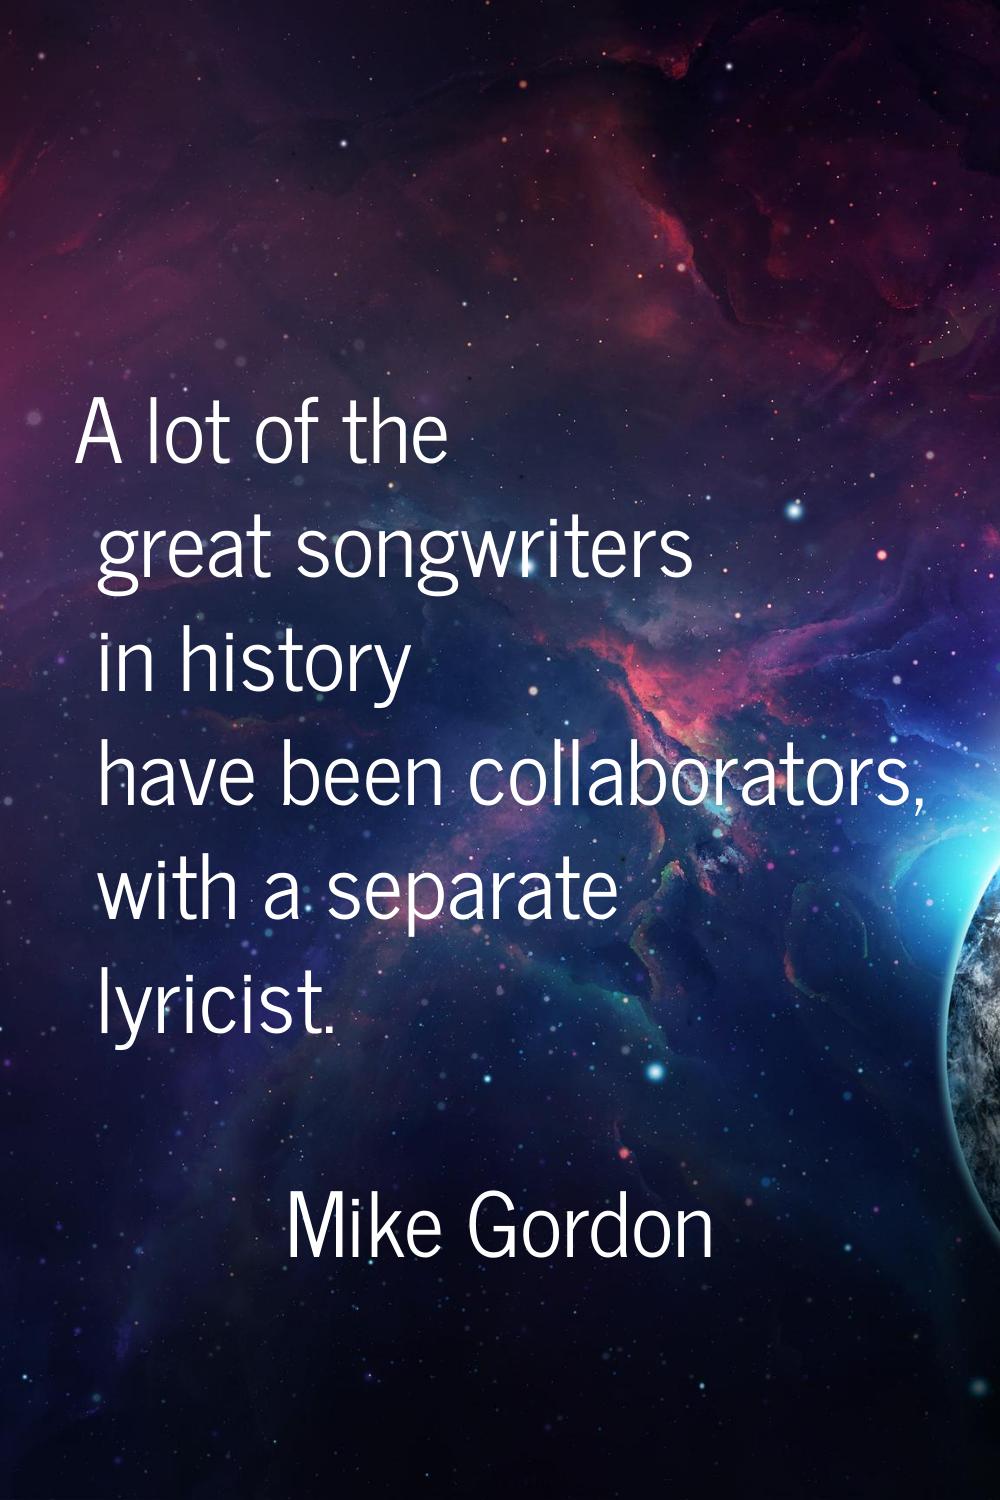 A lot of the great songwriters in history have been collaborators, with a separate lyricist.